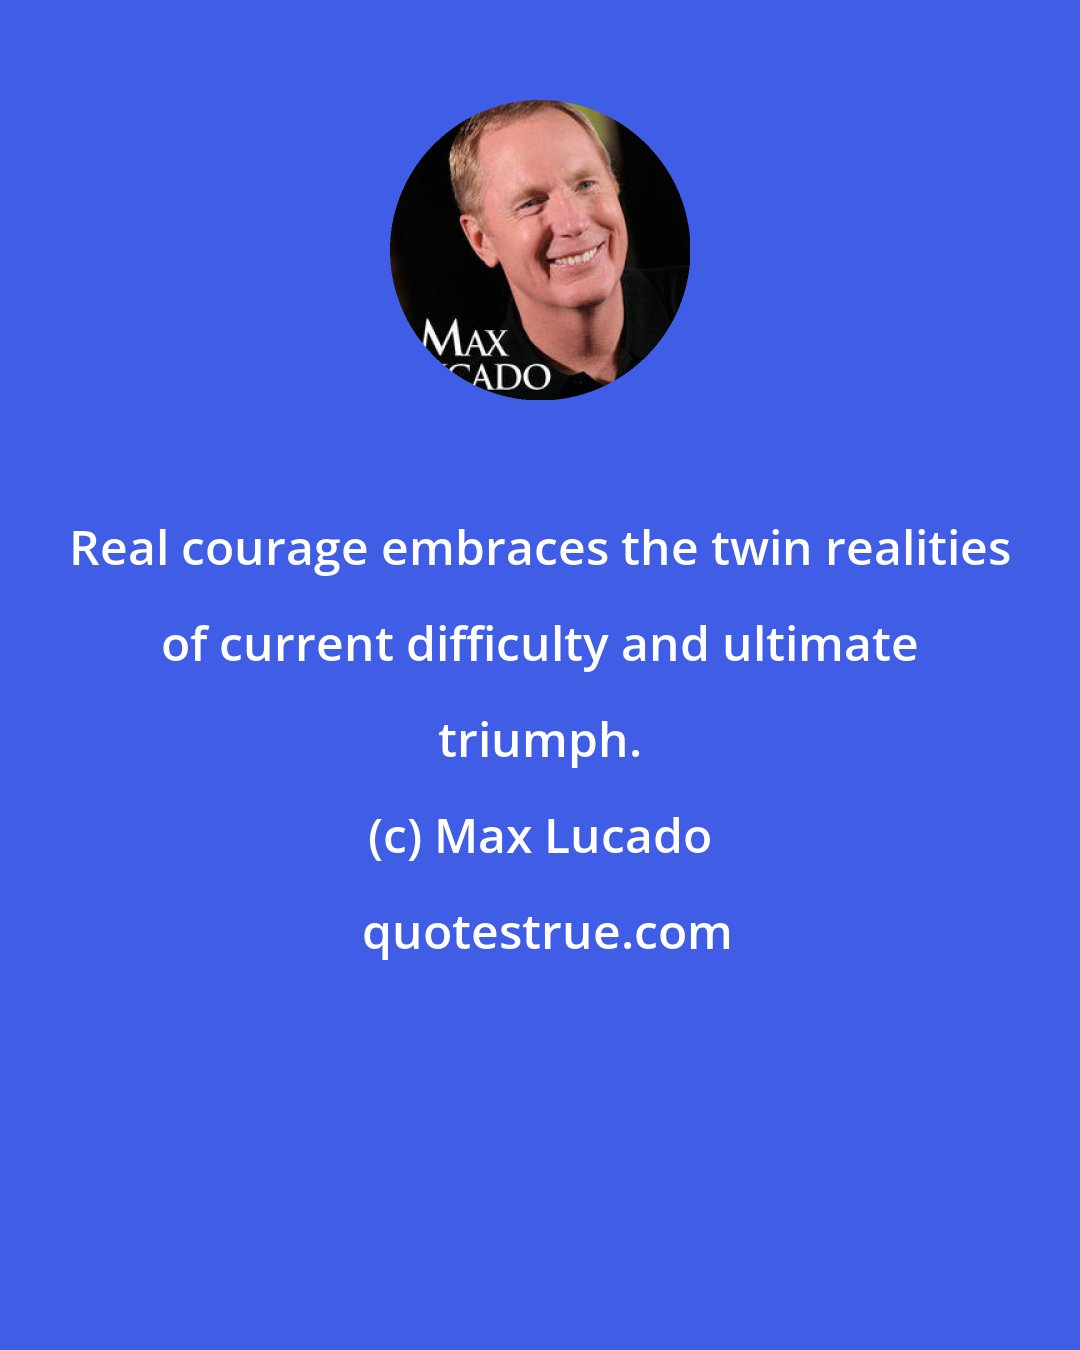 Max Lucado: Real courage embraces the twin realities of current difficulty and ultimate triumph.